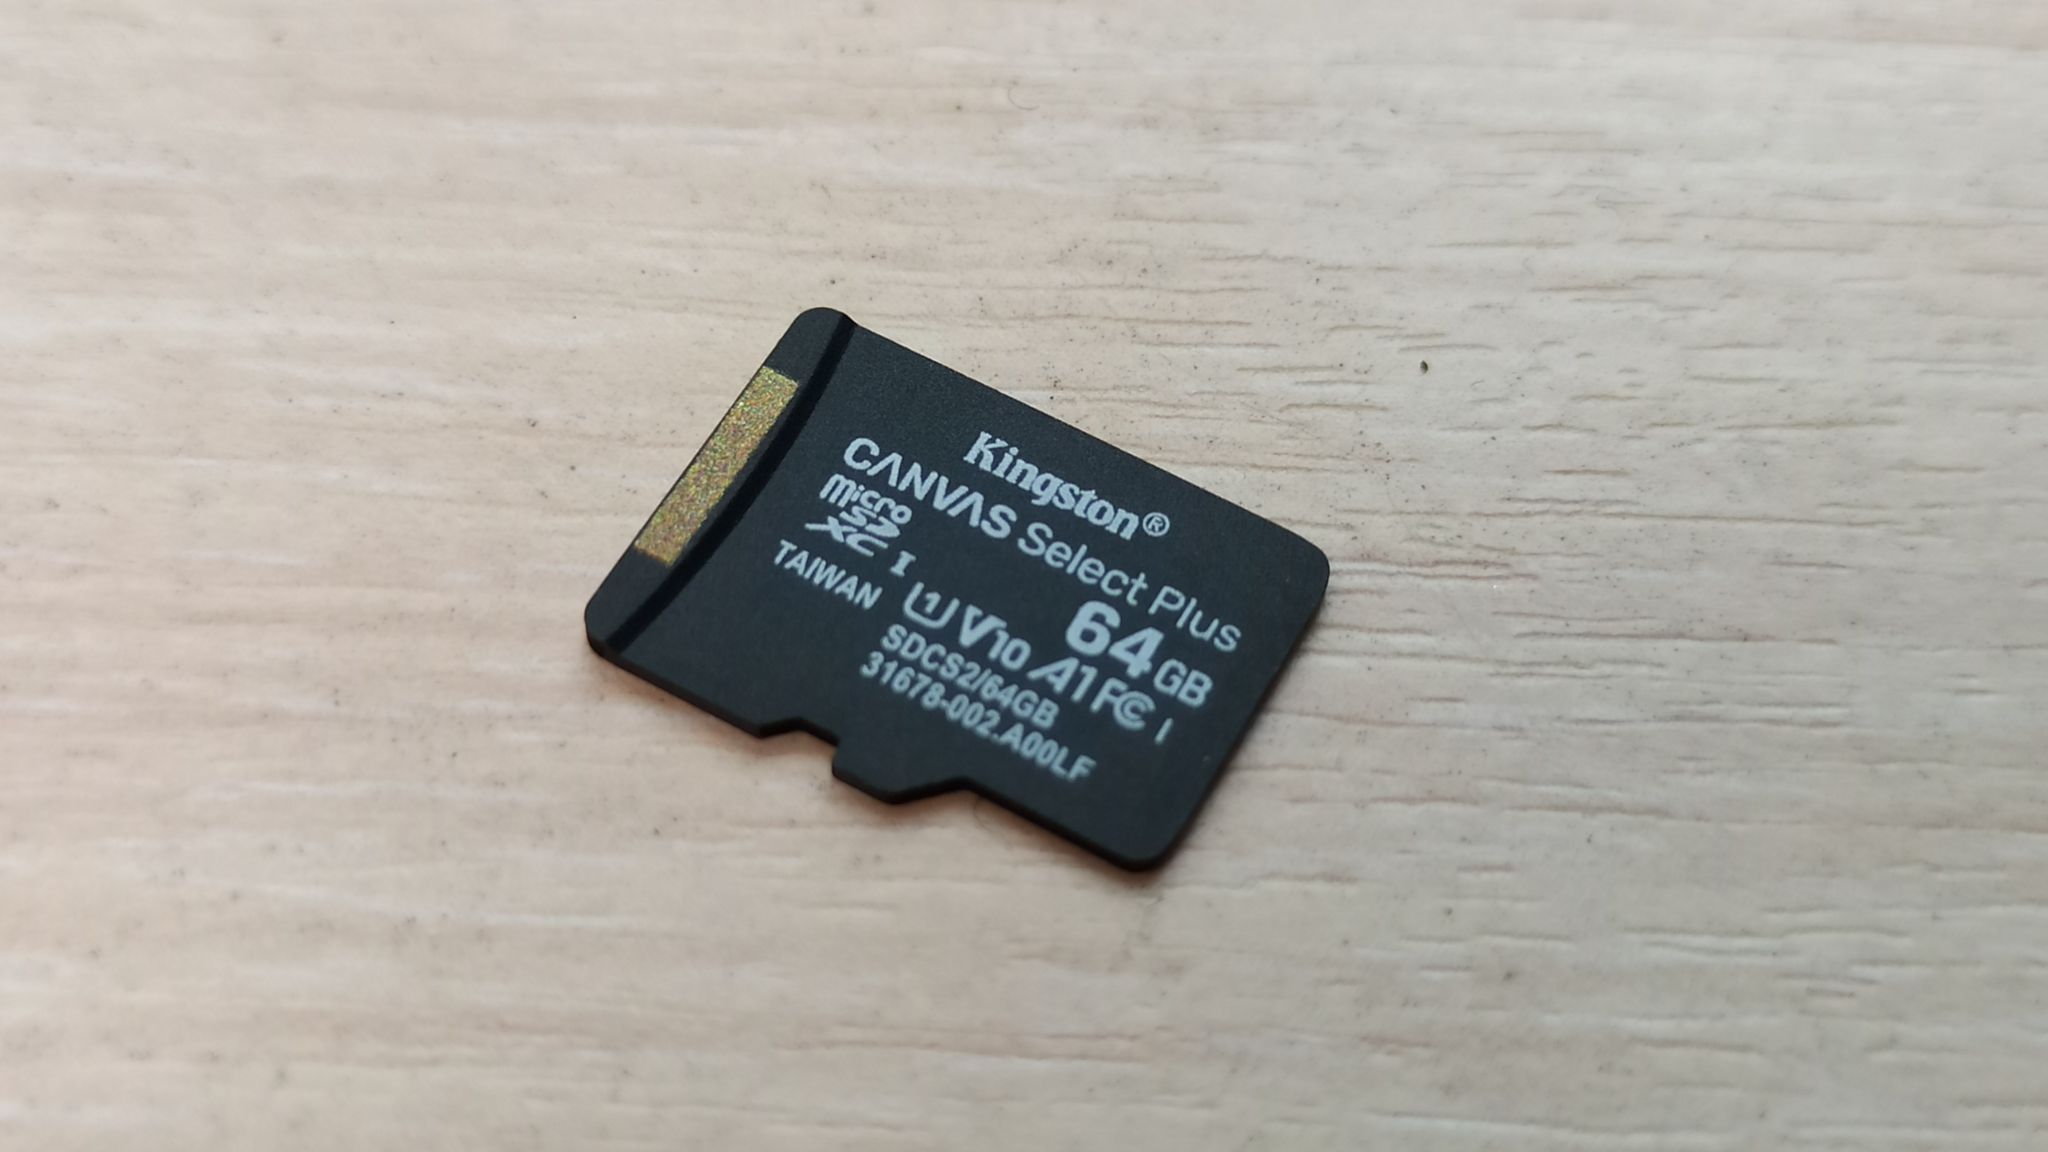 Kingston 32GB Huawei Honor Note 9 MicroSDHC Canvas Select Plus Card Verified by SanFlash. 100MBs Works with Kingston